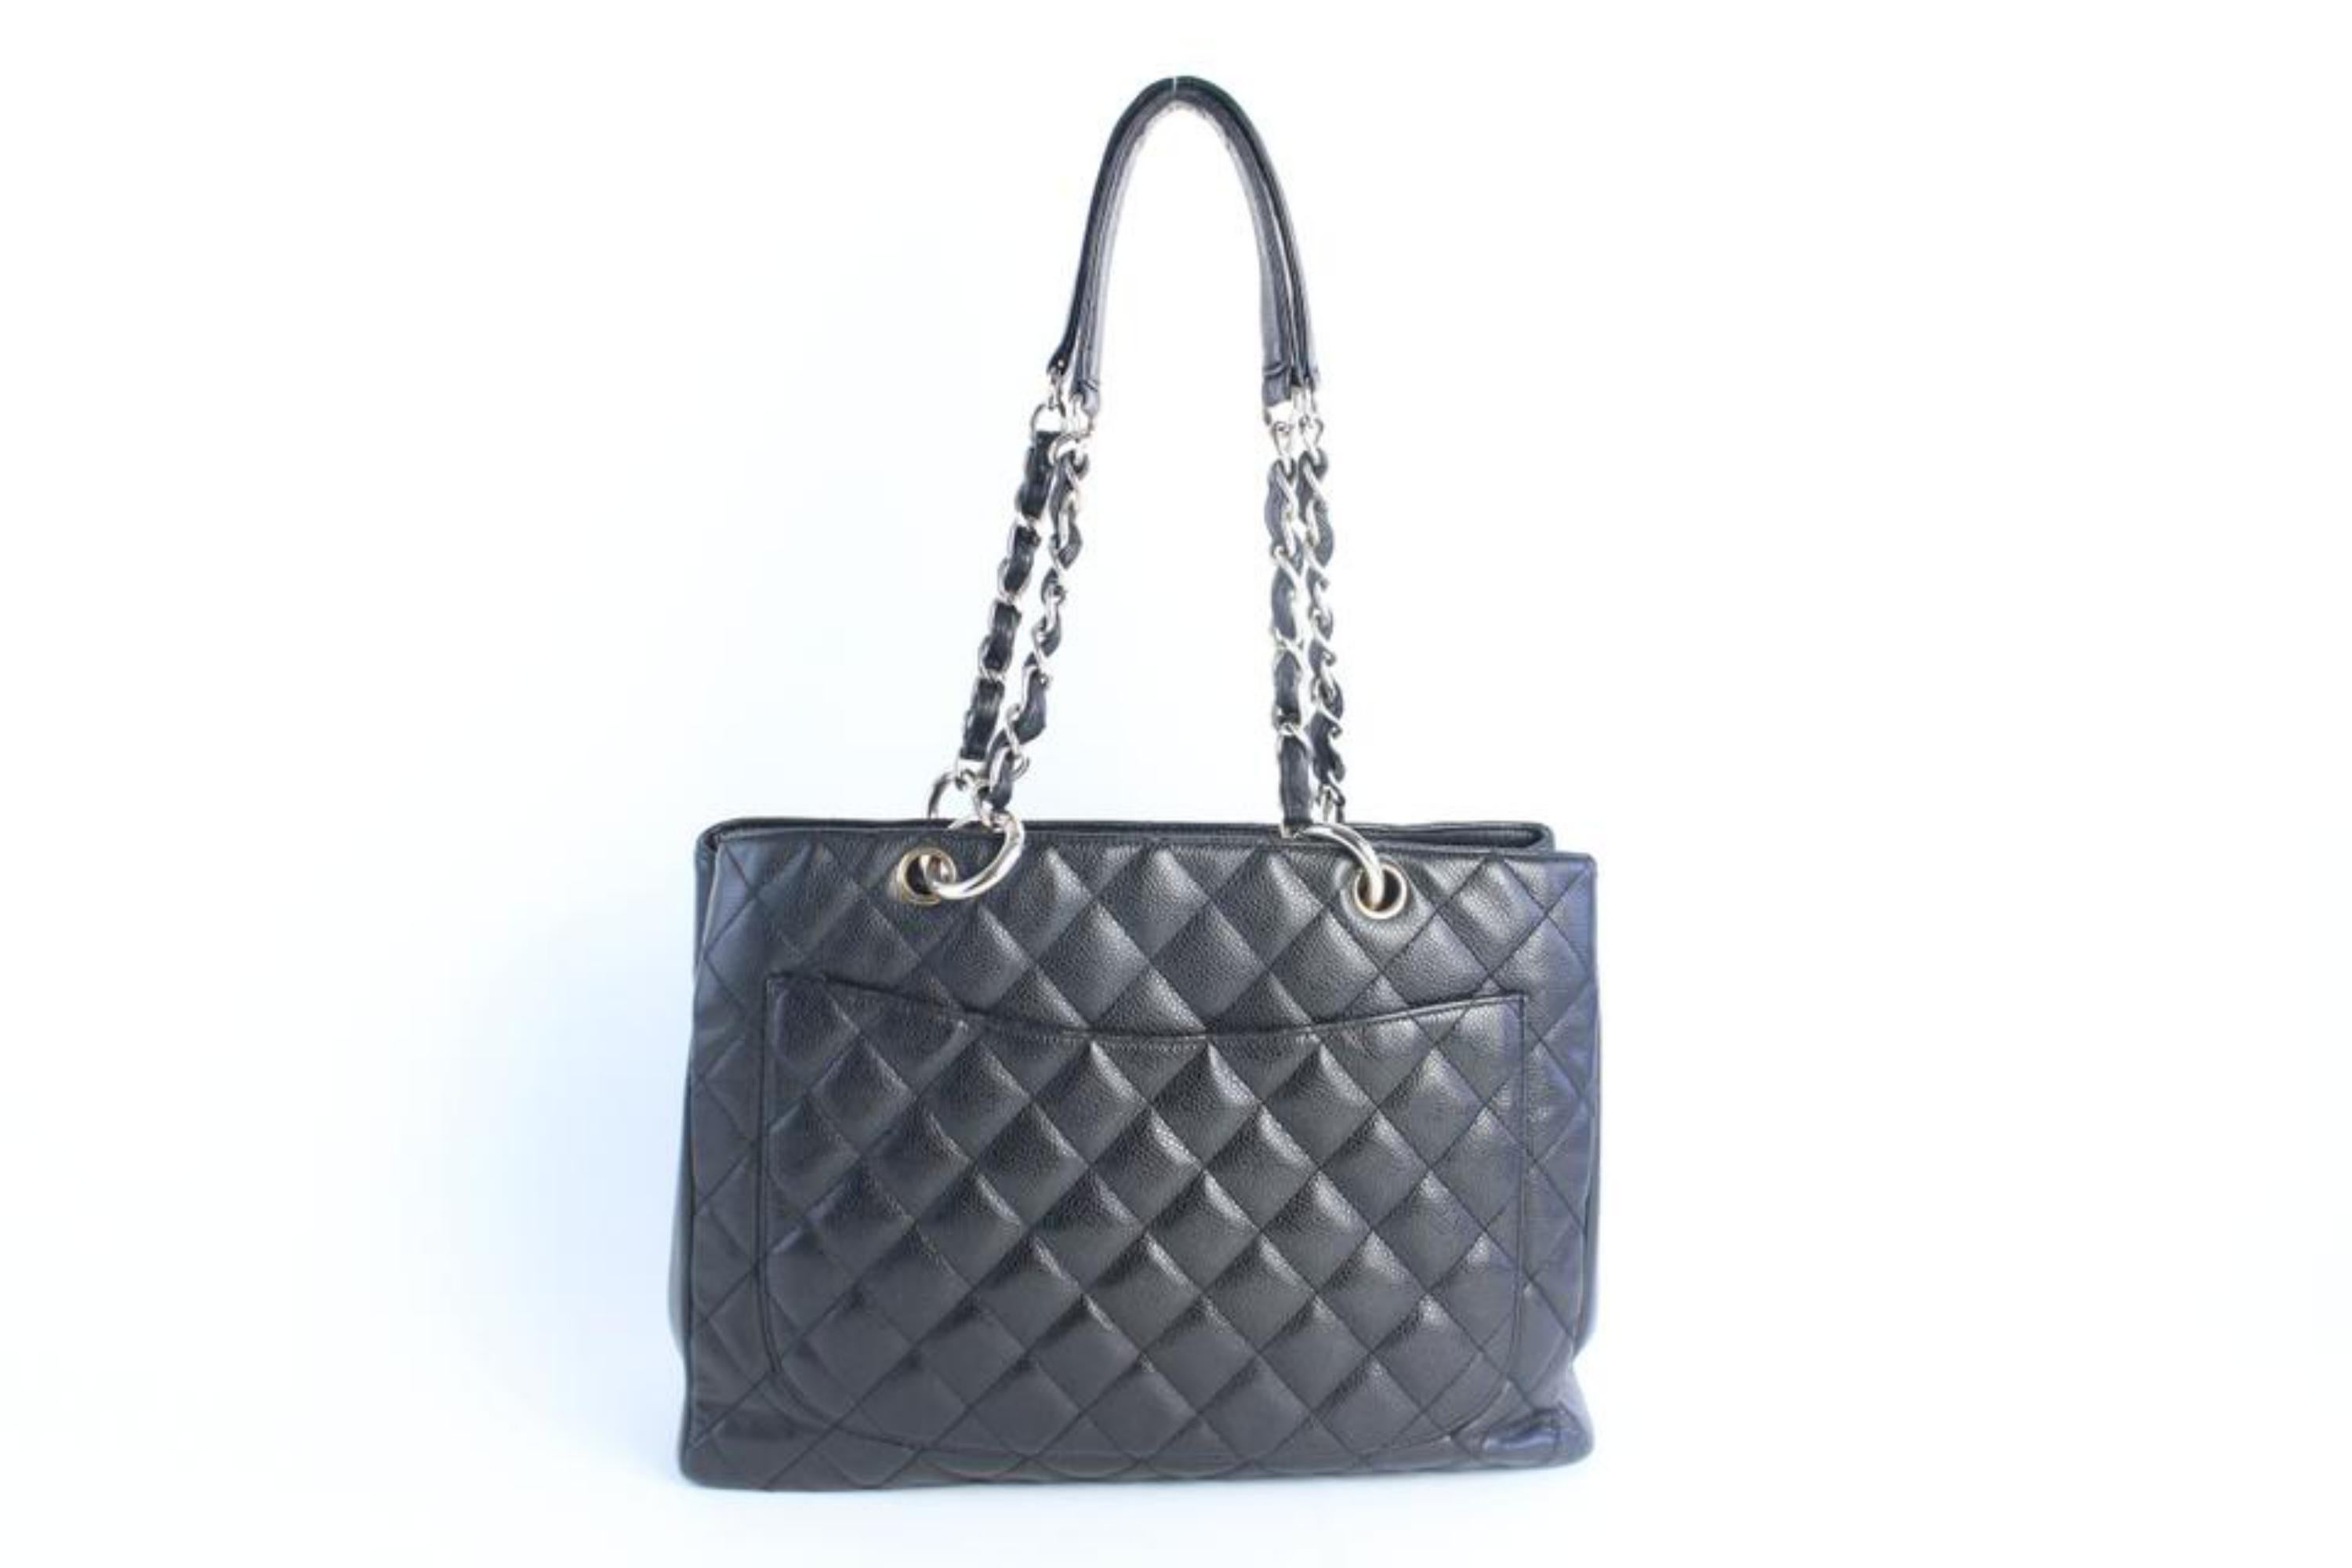 Chanel Shopping Tote Quilted Gst 17cz0828 Black Leather Shoulder Bag For Sale 4